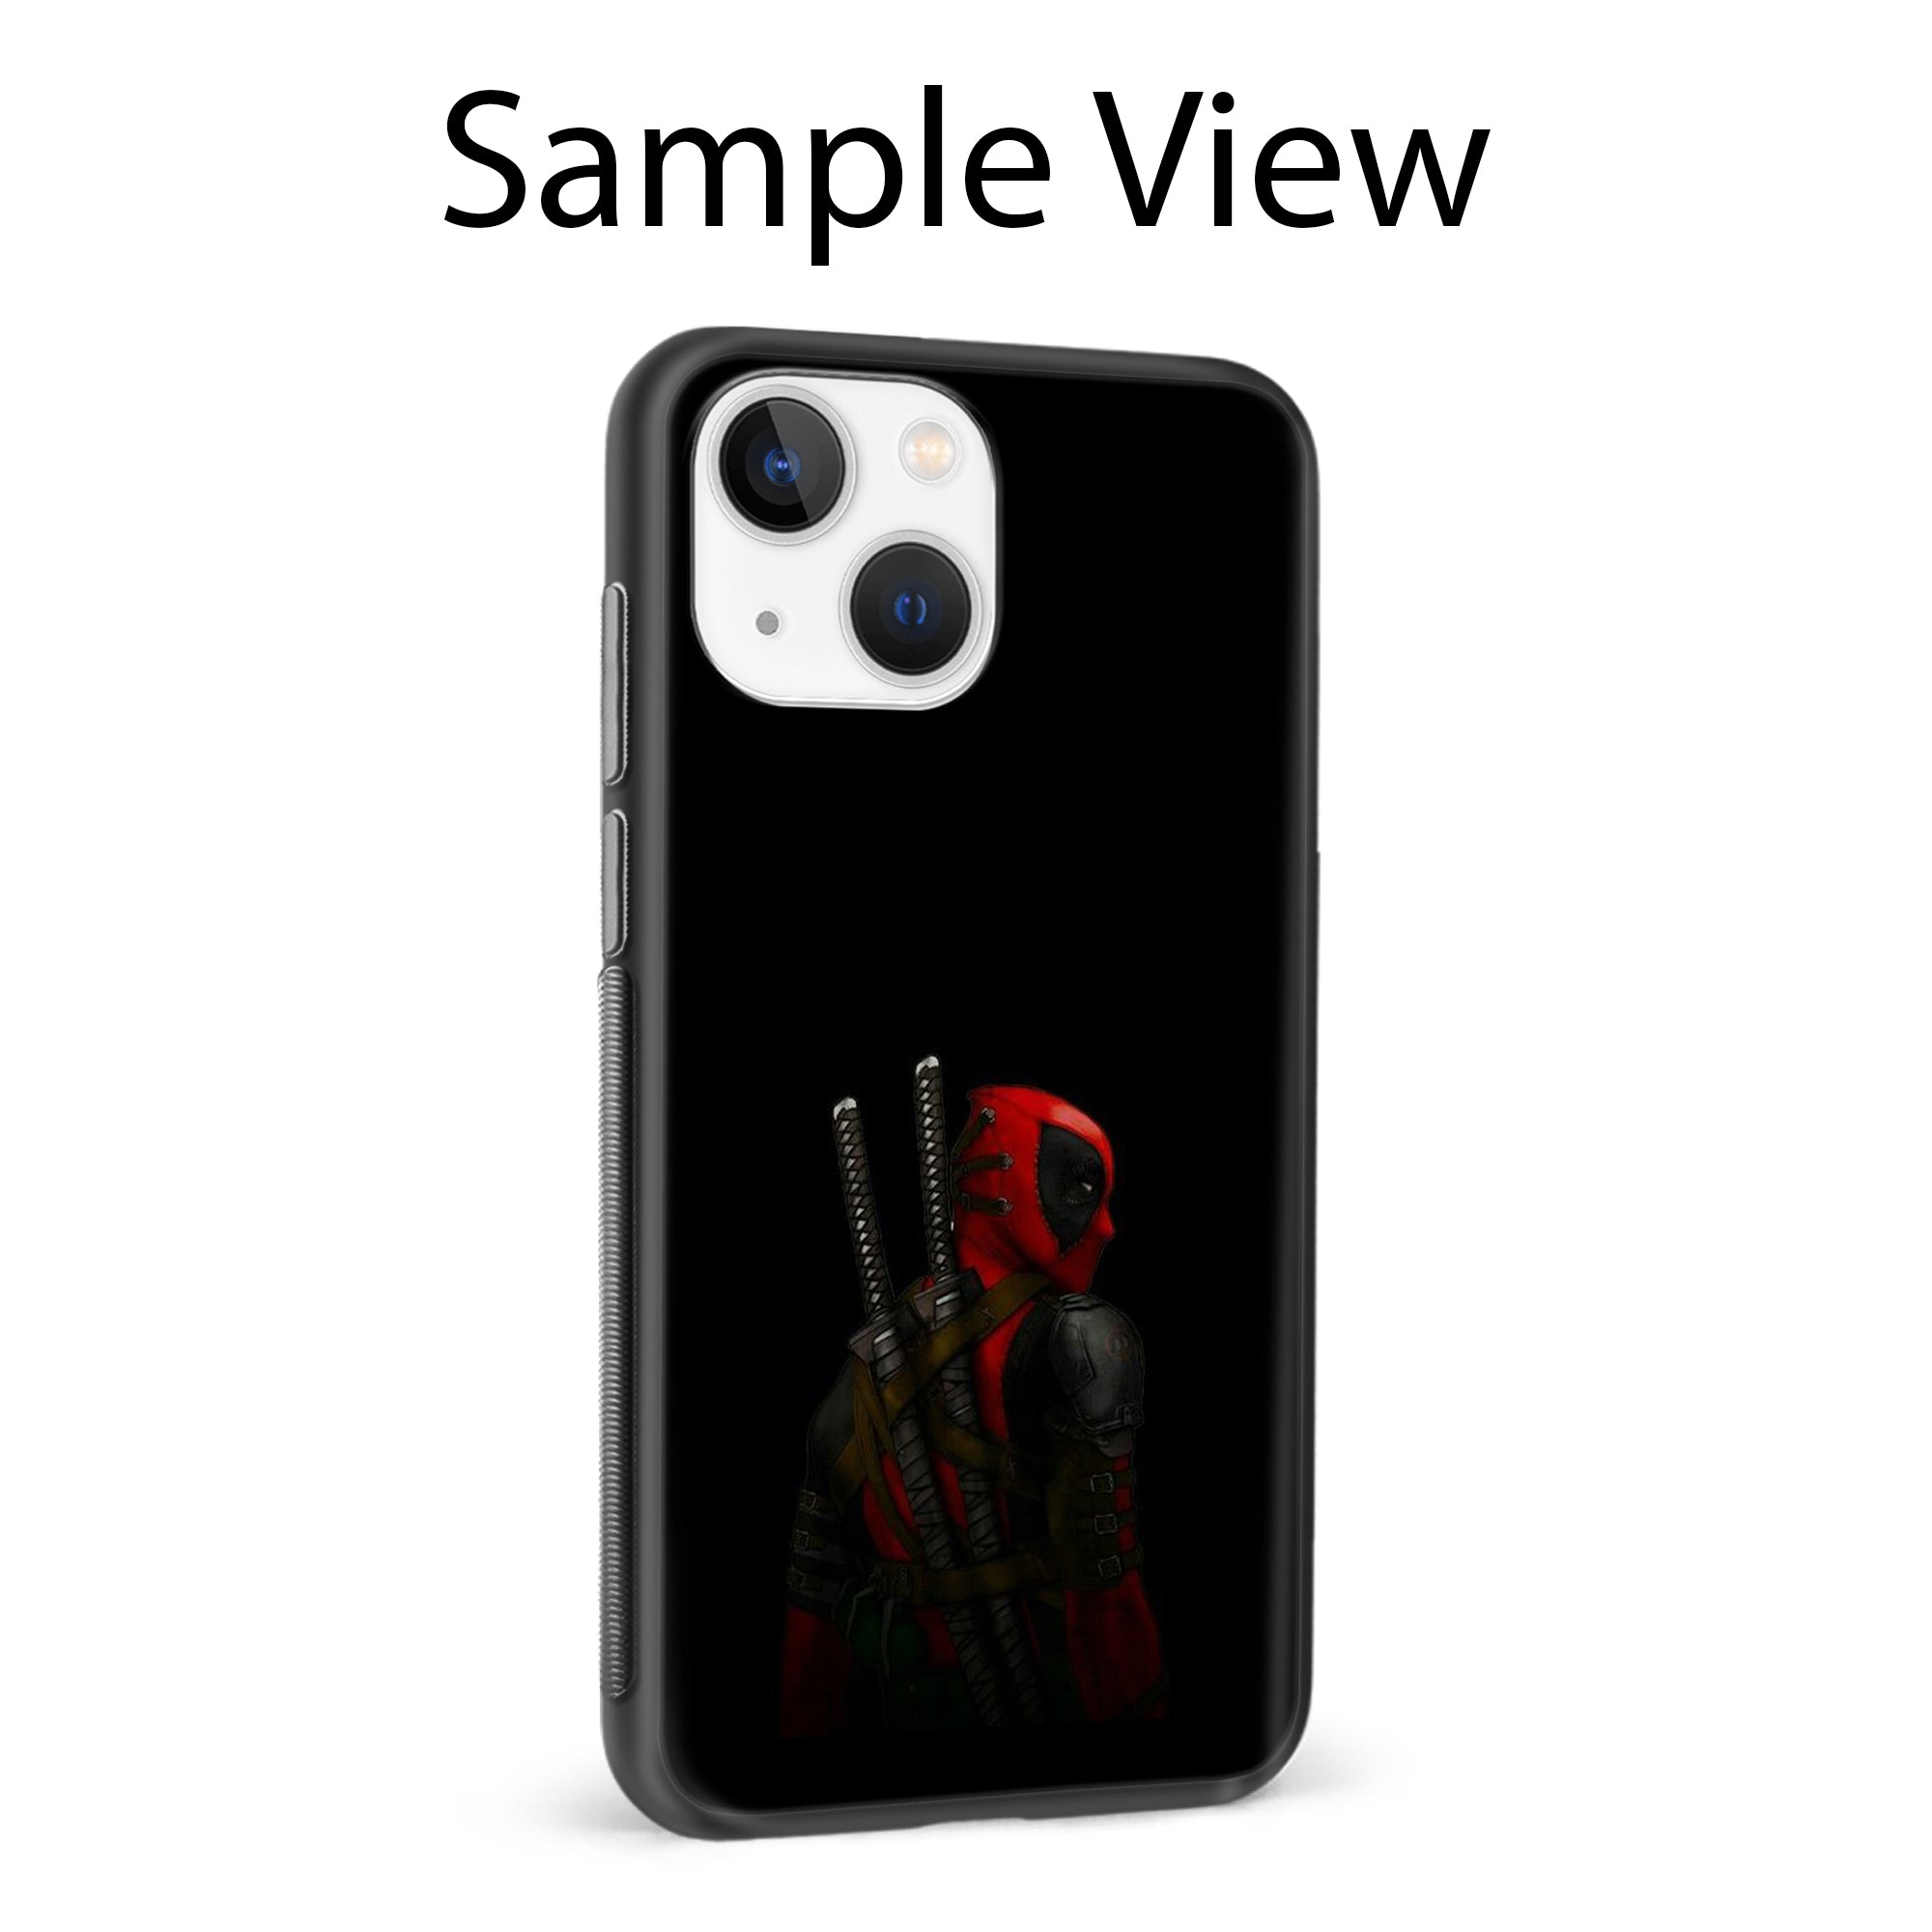 Buy Deadpool Metal-Silicon Back Mobile Phone Case/Cover For Samsung Galaxy S20 Online